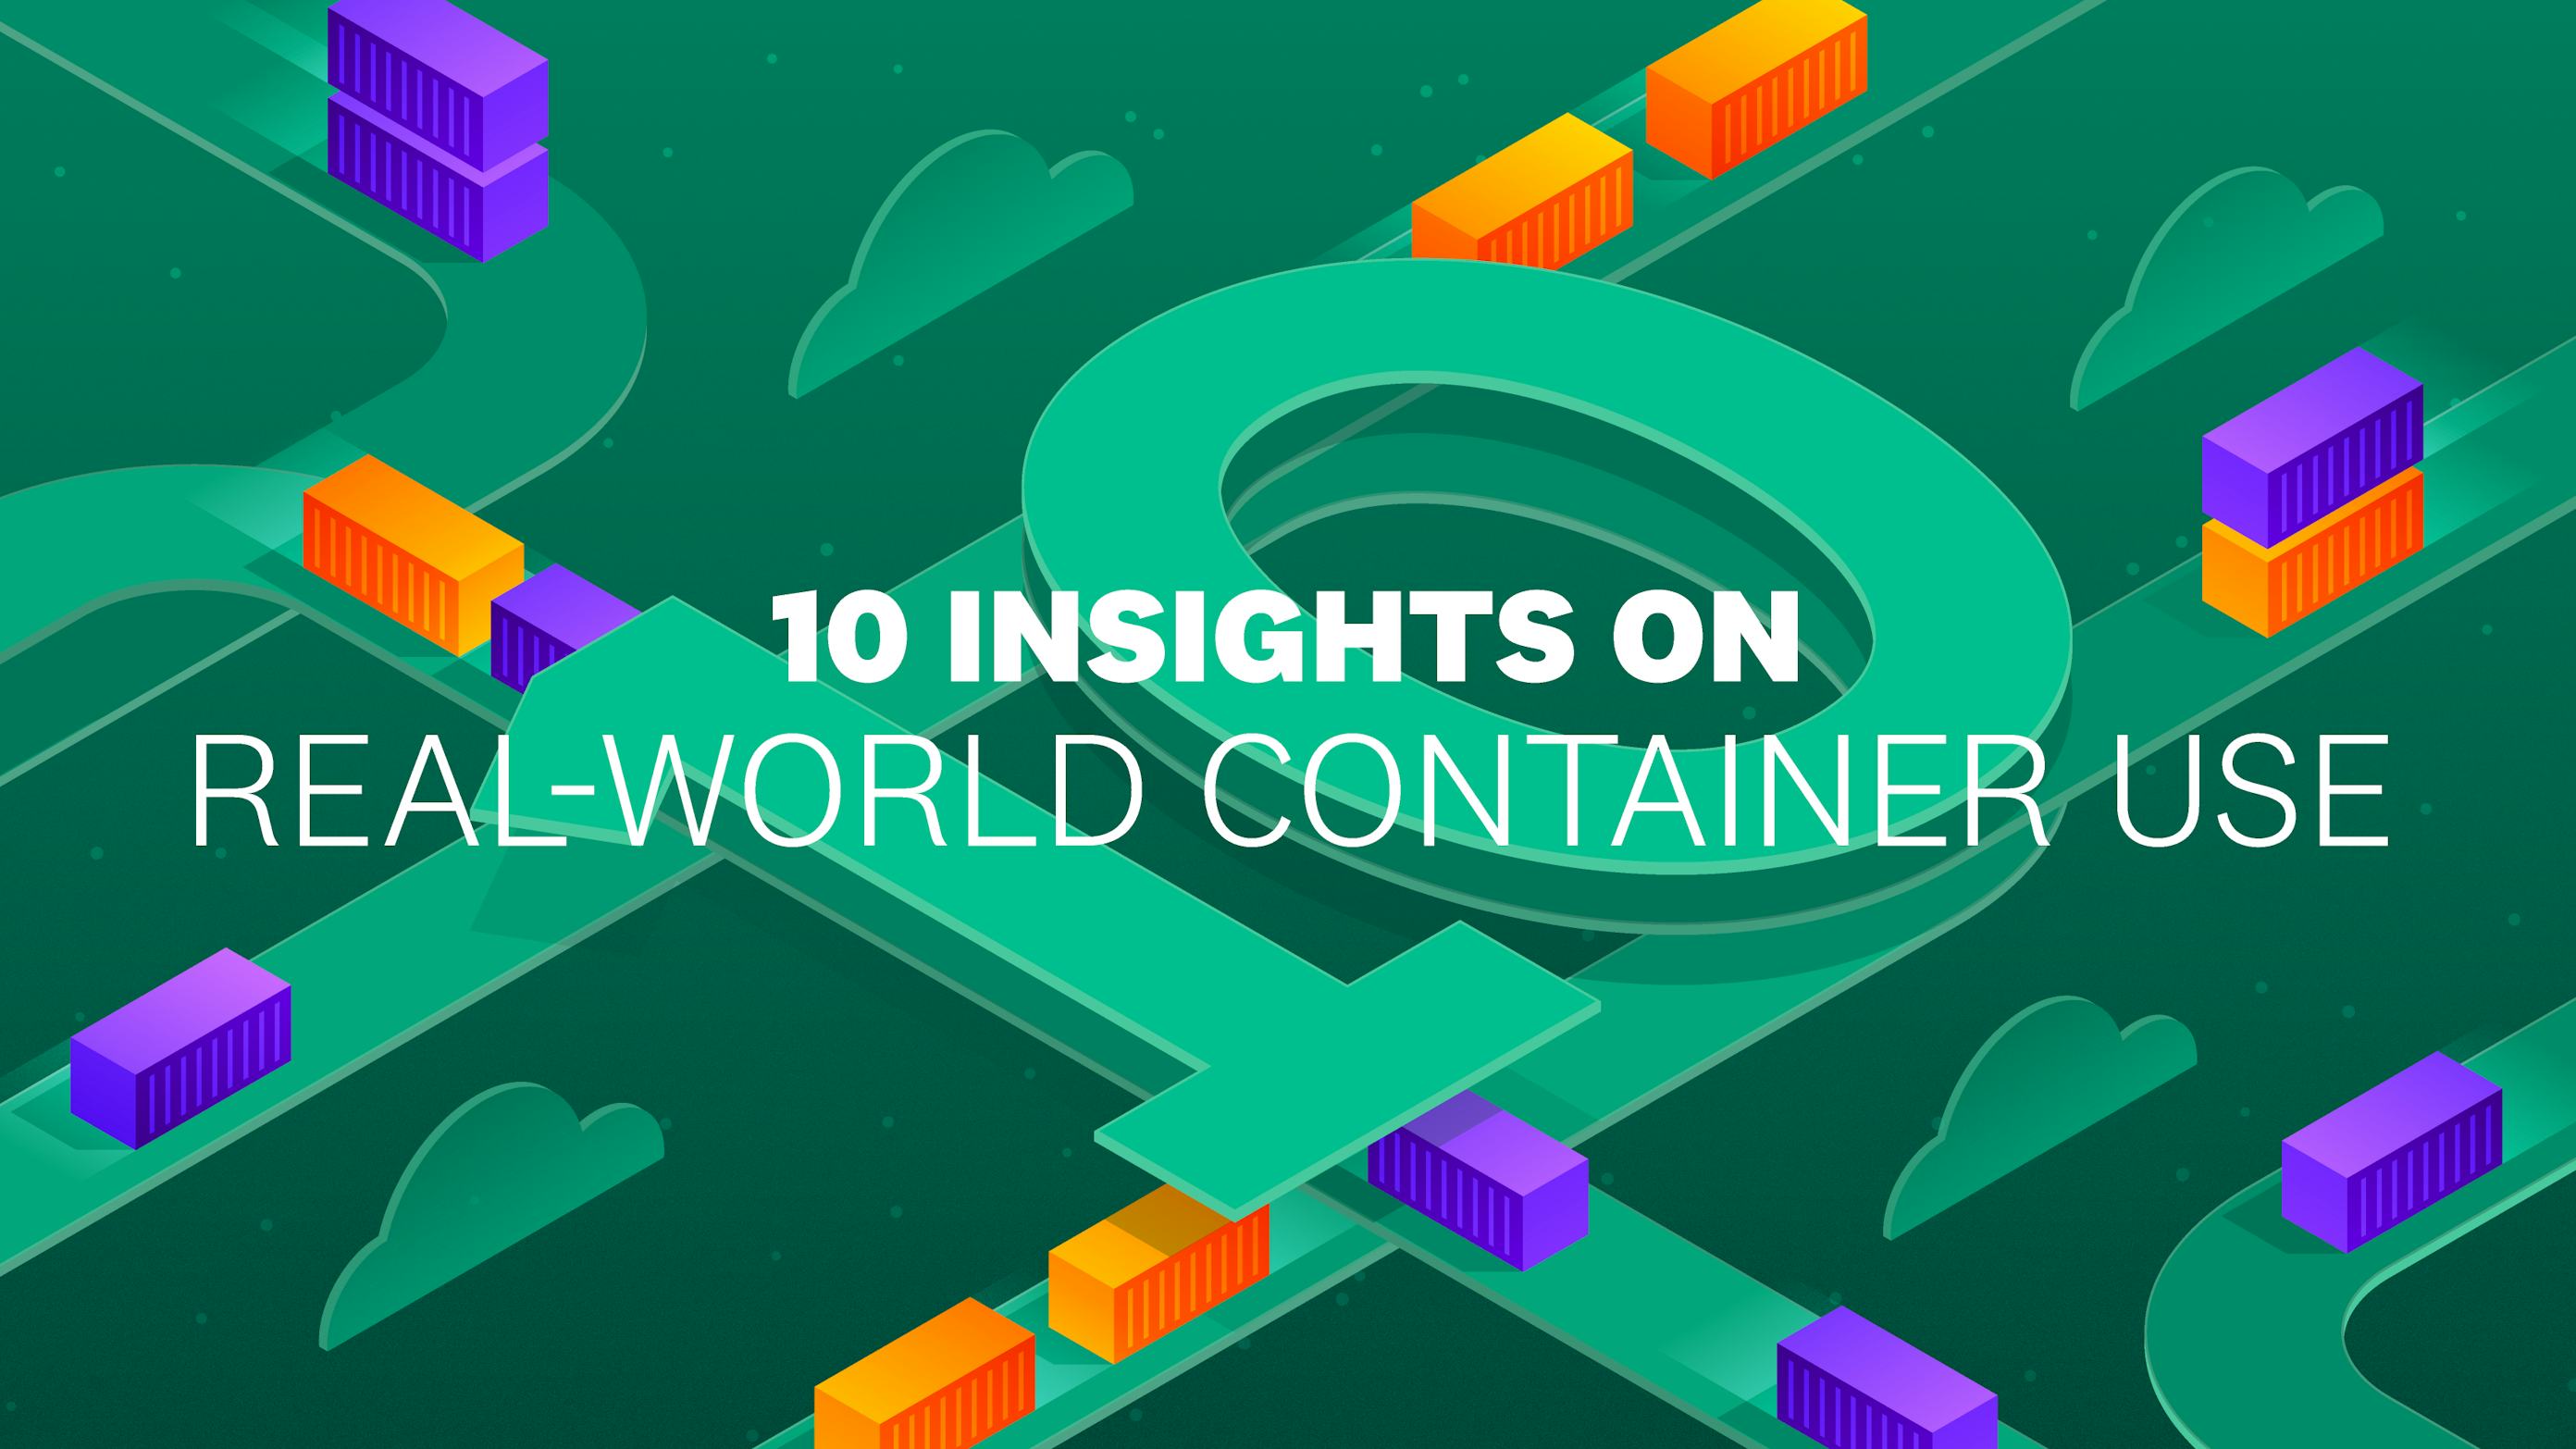 10 insights on real-world container use